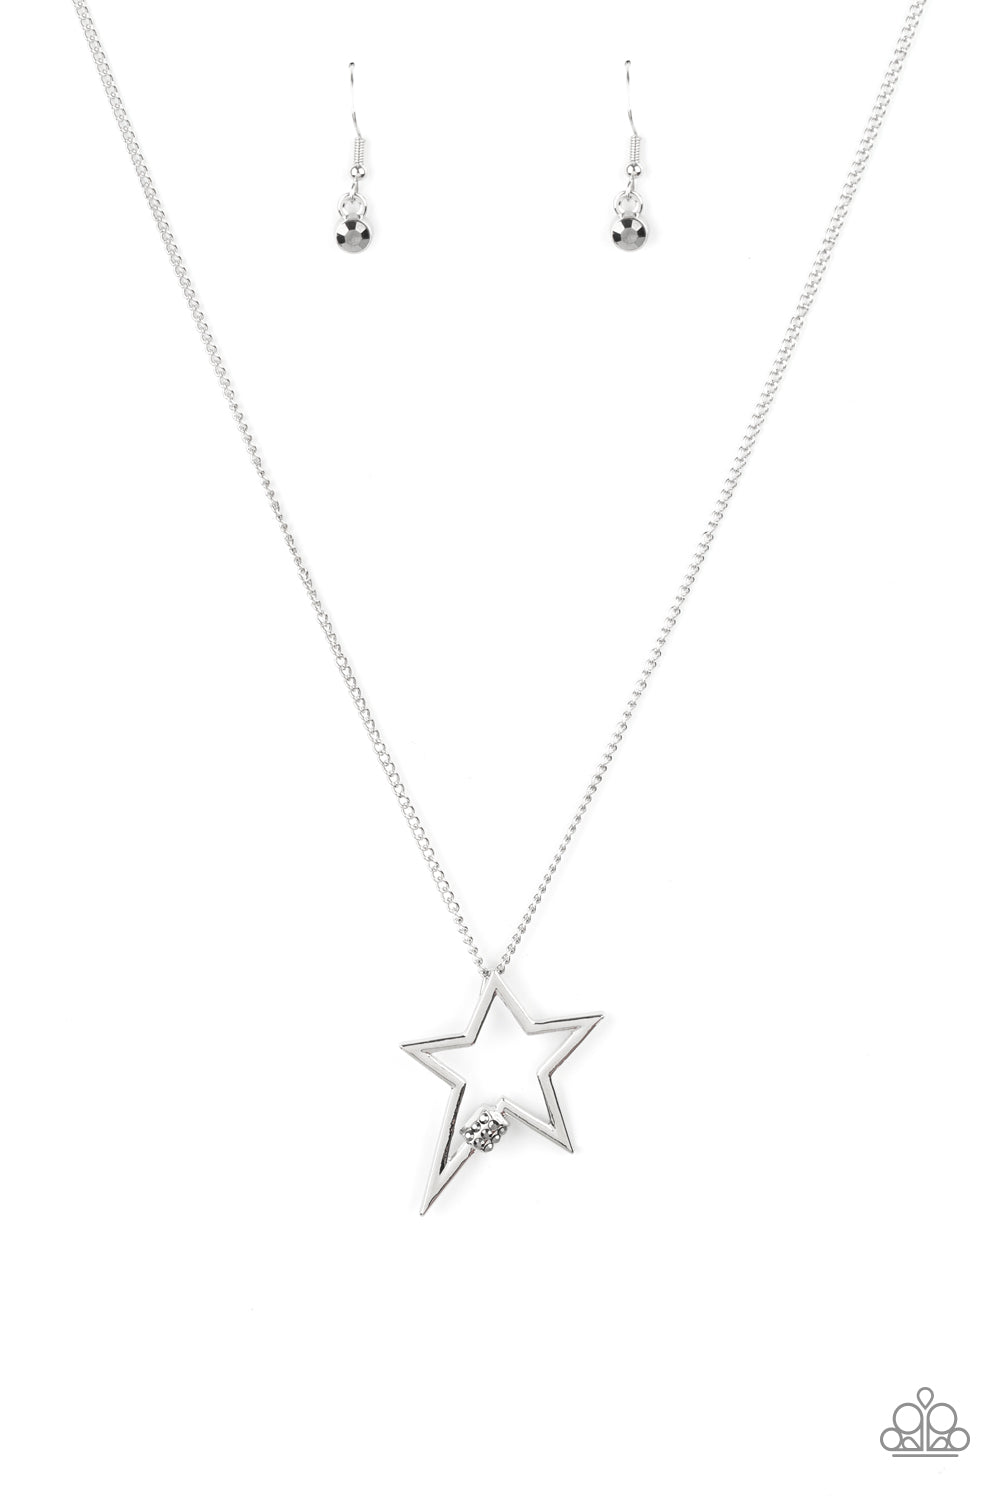 Paparazzi Light Up The Sky - Silver Necklace - A Finishing Touch Jewelry